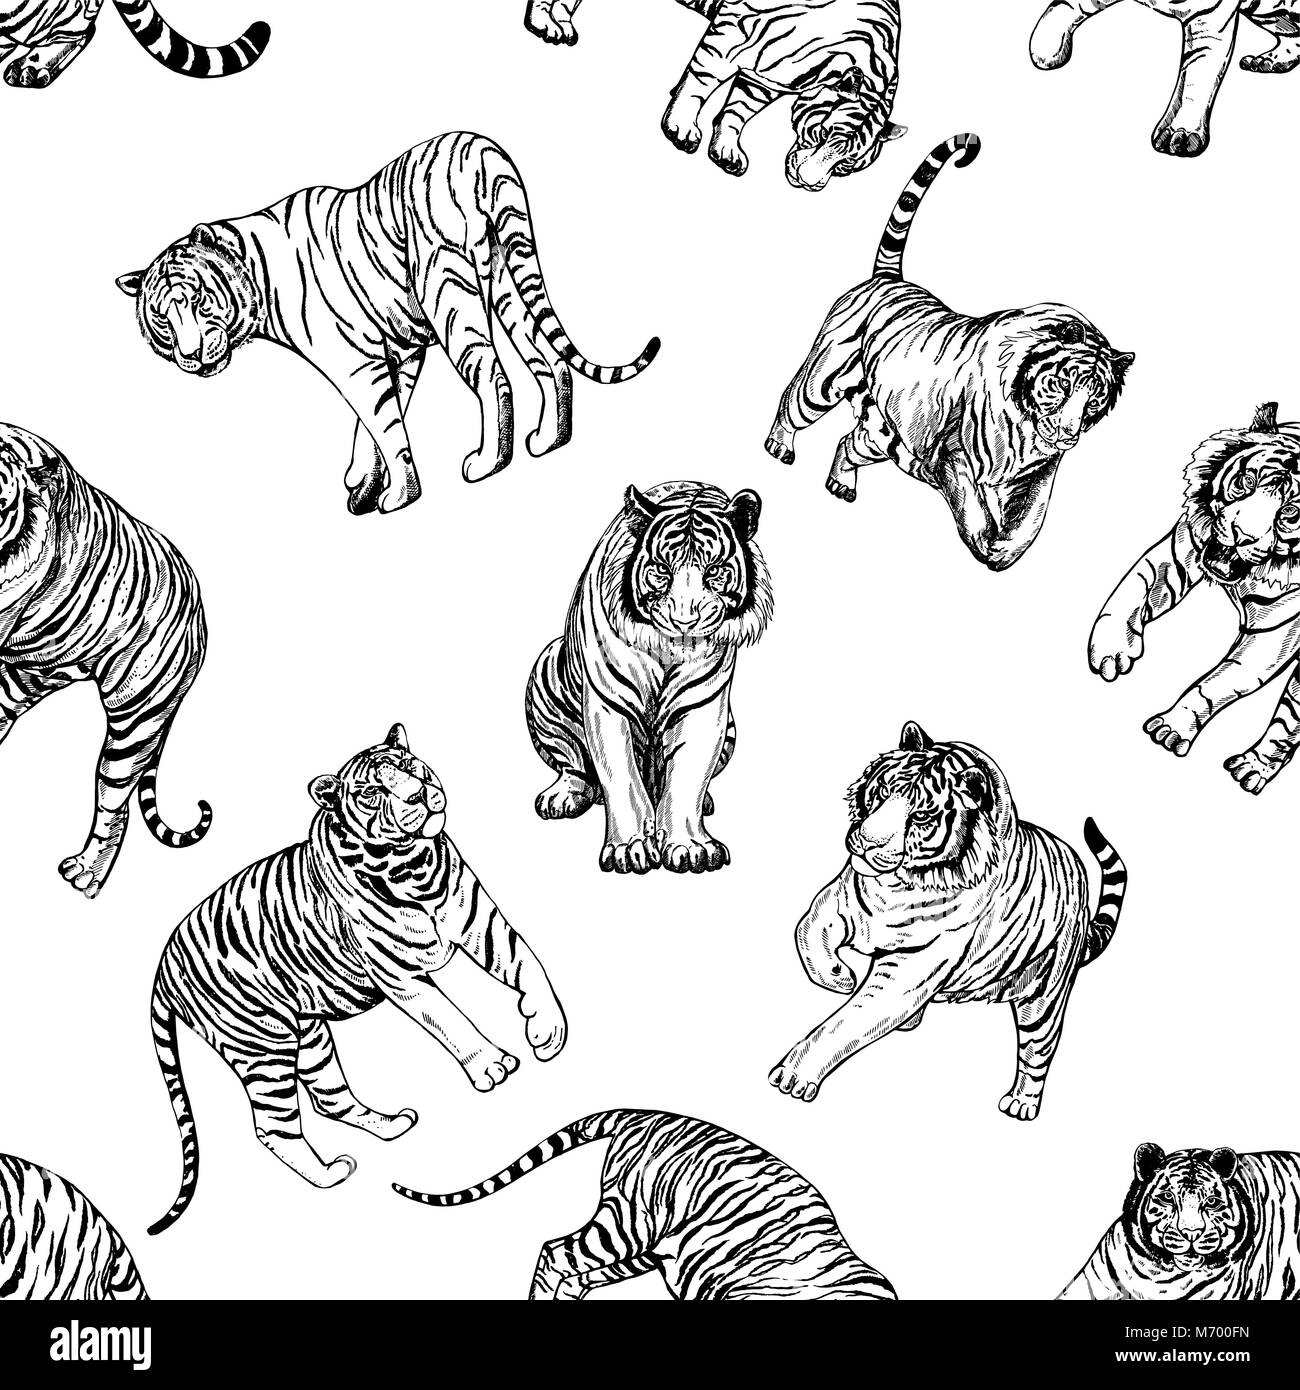 Seamless Pattern Of Hand Drawn Sketch Style Tigers Vector Illustration Isolated On White 